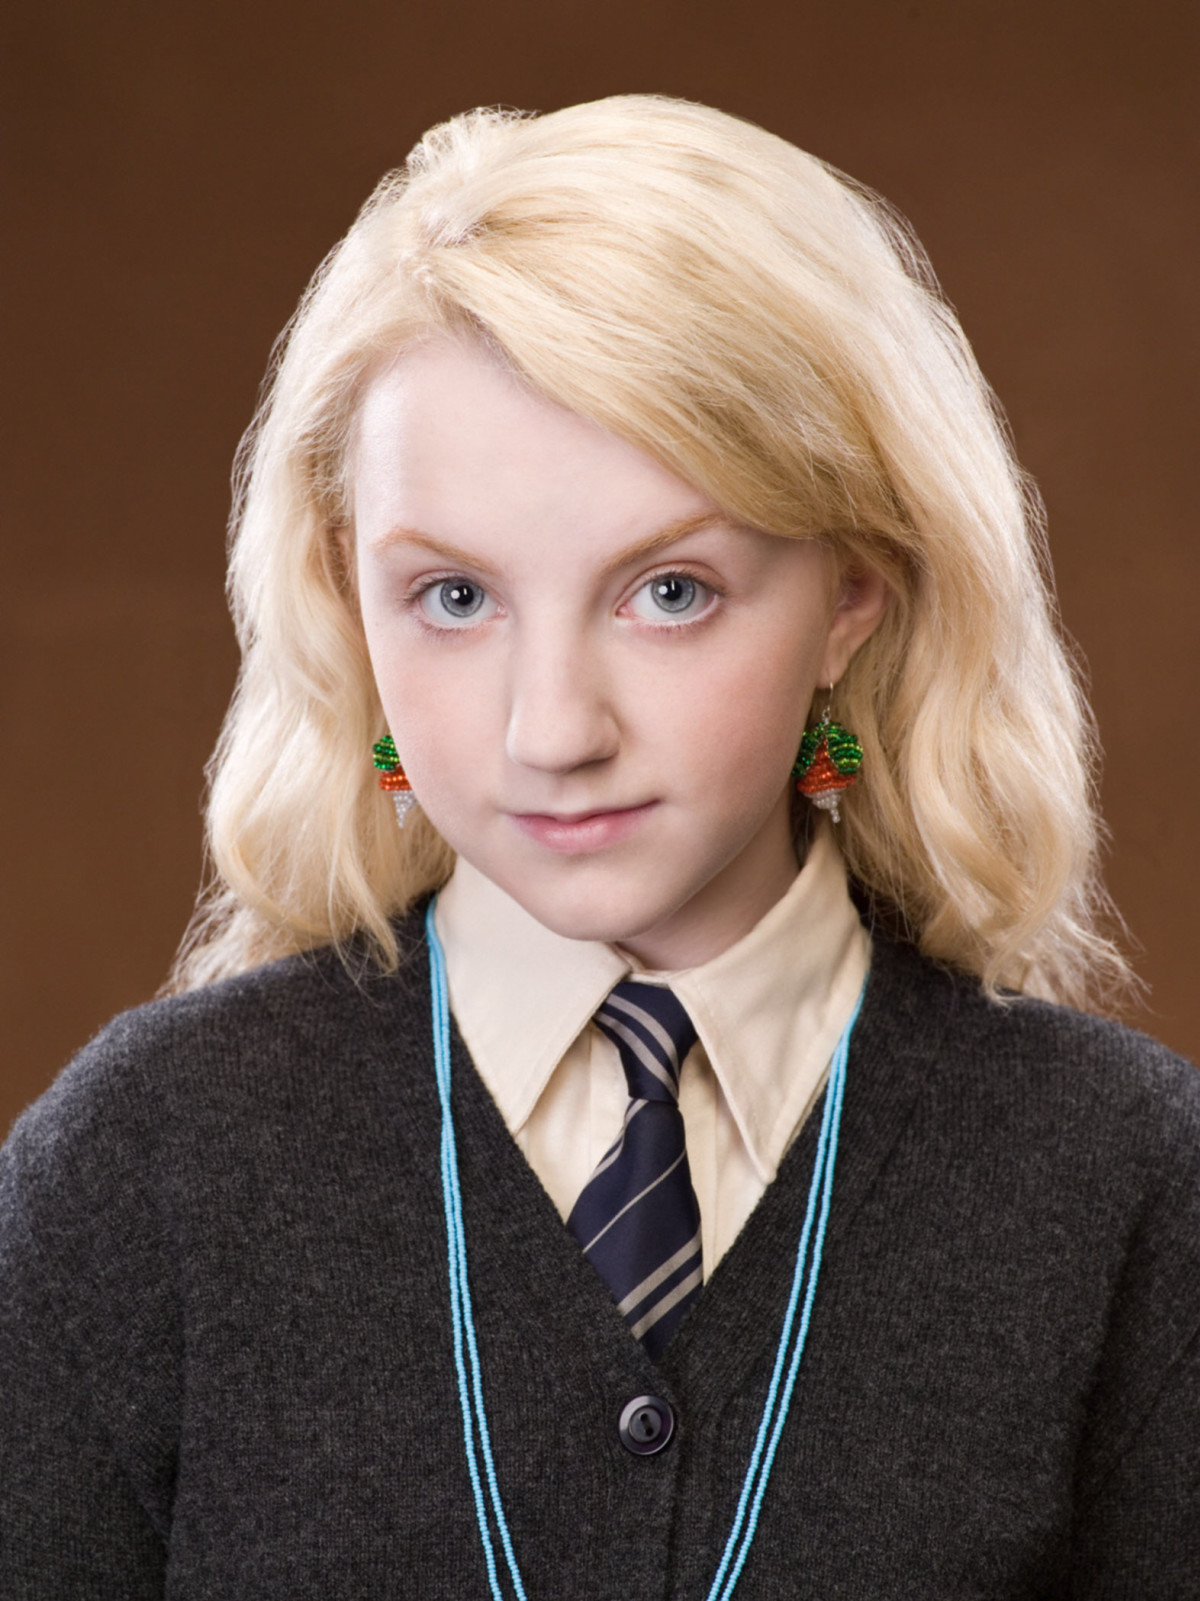 The Harry Potter Movies: The Legacy of Luna Lovegood and her Quirks 2